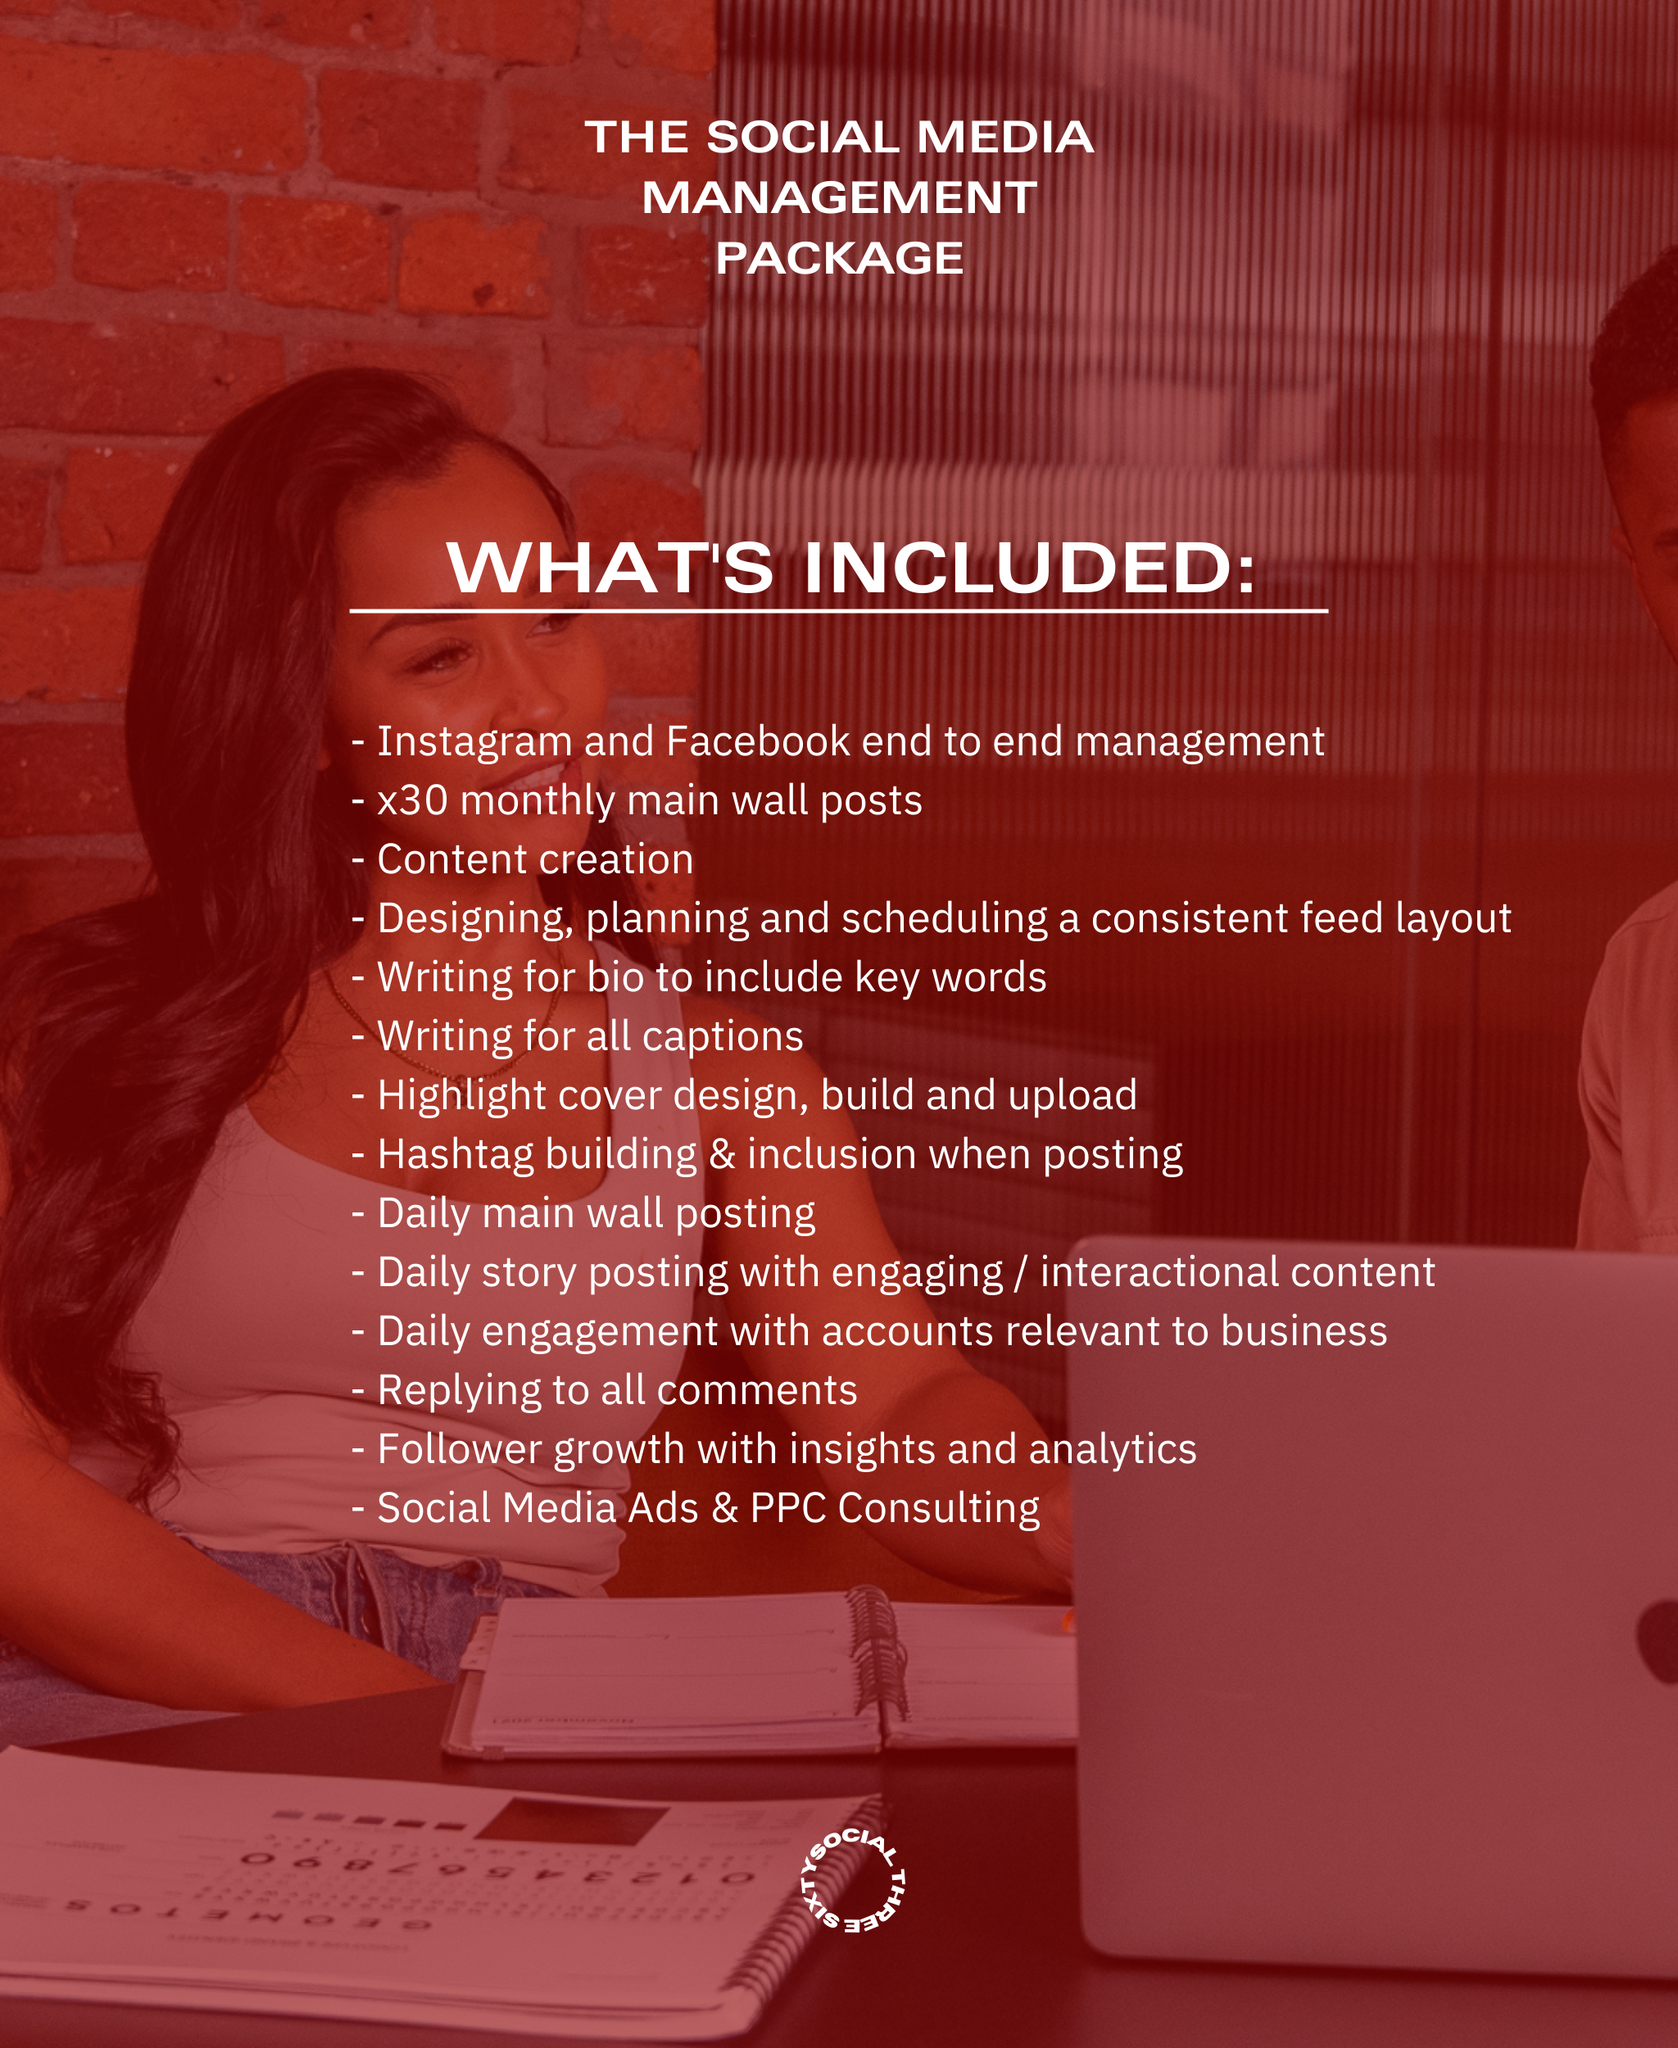 The Social Media Management Package